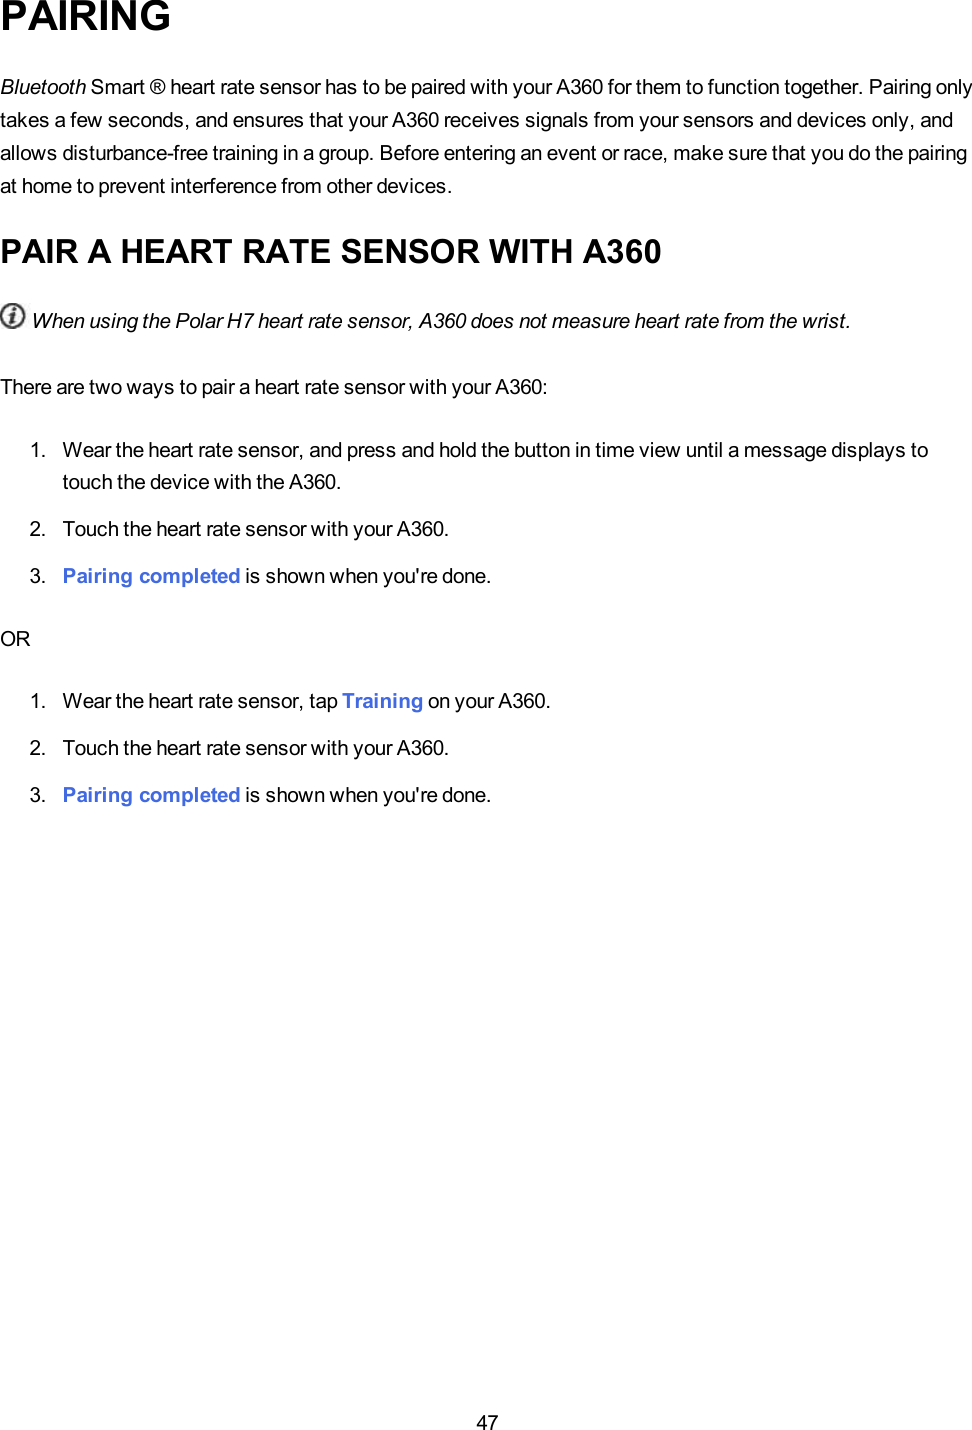 47PAIRINGBluetooth Smart ® heart rate sensor has to be paired with your A360 for them to function together. Pairing onlytakes a few seconds, and ensures that your A360 receives signals from your sensors and devices only, andallows disturbance-free training in a group. Before entering an event or race, make sure that you do the pairingat home to prevent interference from other devices.PAIR A HEART RATE SENSOR WITH A360When using the Polar H7 heart rate sensor, A360 does not measure heart rate from the wrist.There are two ways to pair a heart rate sensor with your A360:1. Wear the heart rate sensor, and press and hold the button in time view until a message displays totouch the device with the A360.2. Touch the heart rate sensor with your A360.3. Pairing completed is shown when you&apos;re done.OR1. Wear the heart rate sensor, tap Training on your A360.2. Touch the heart rate sensor with your A360.3. Pairing completed is shown when you&apos;re done.